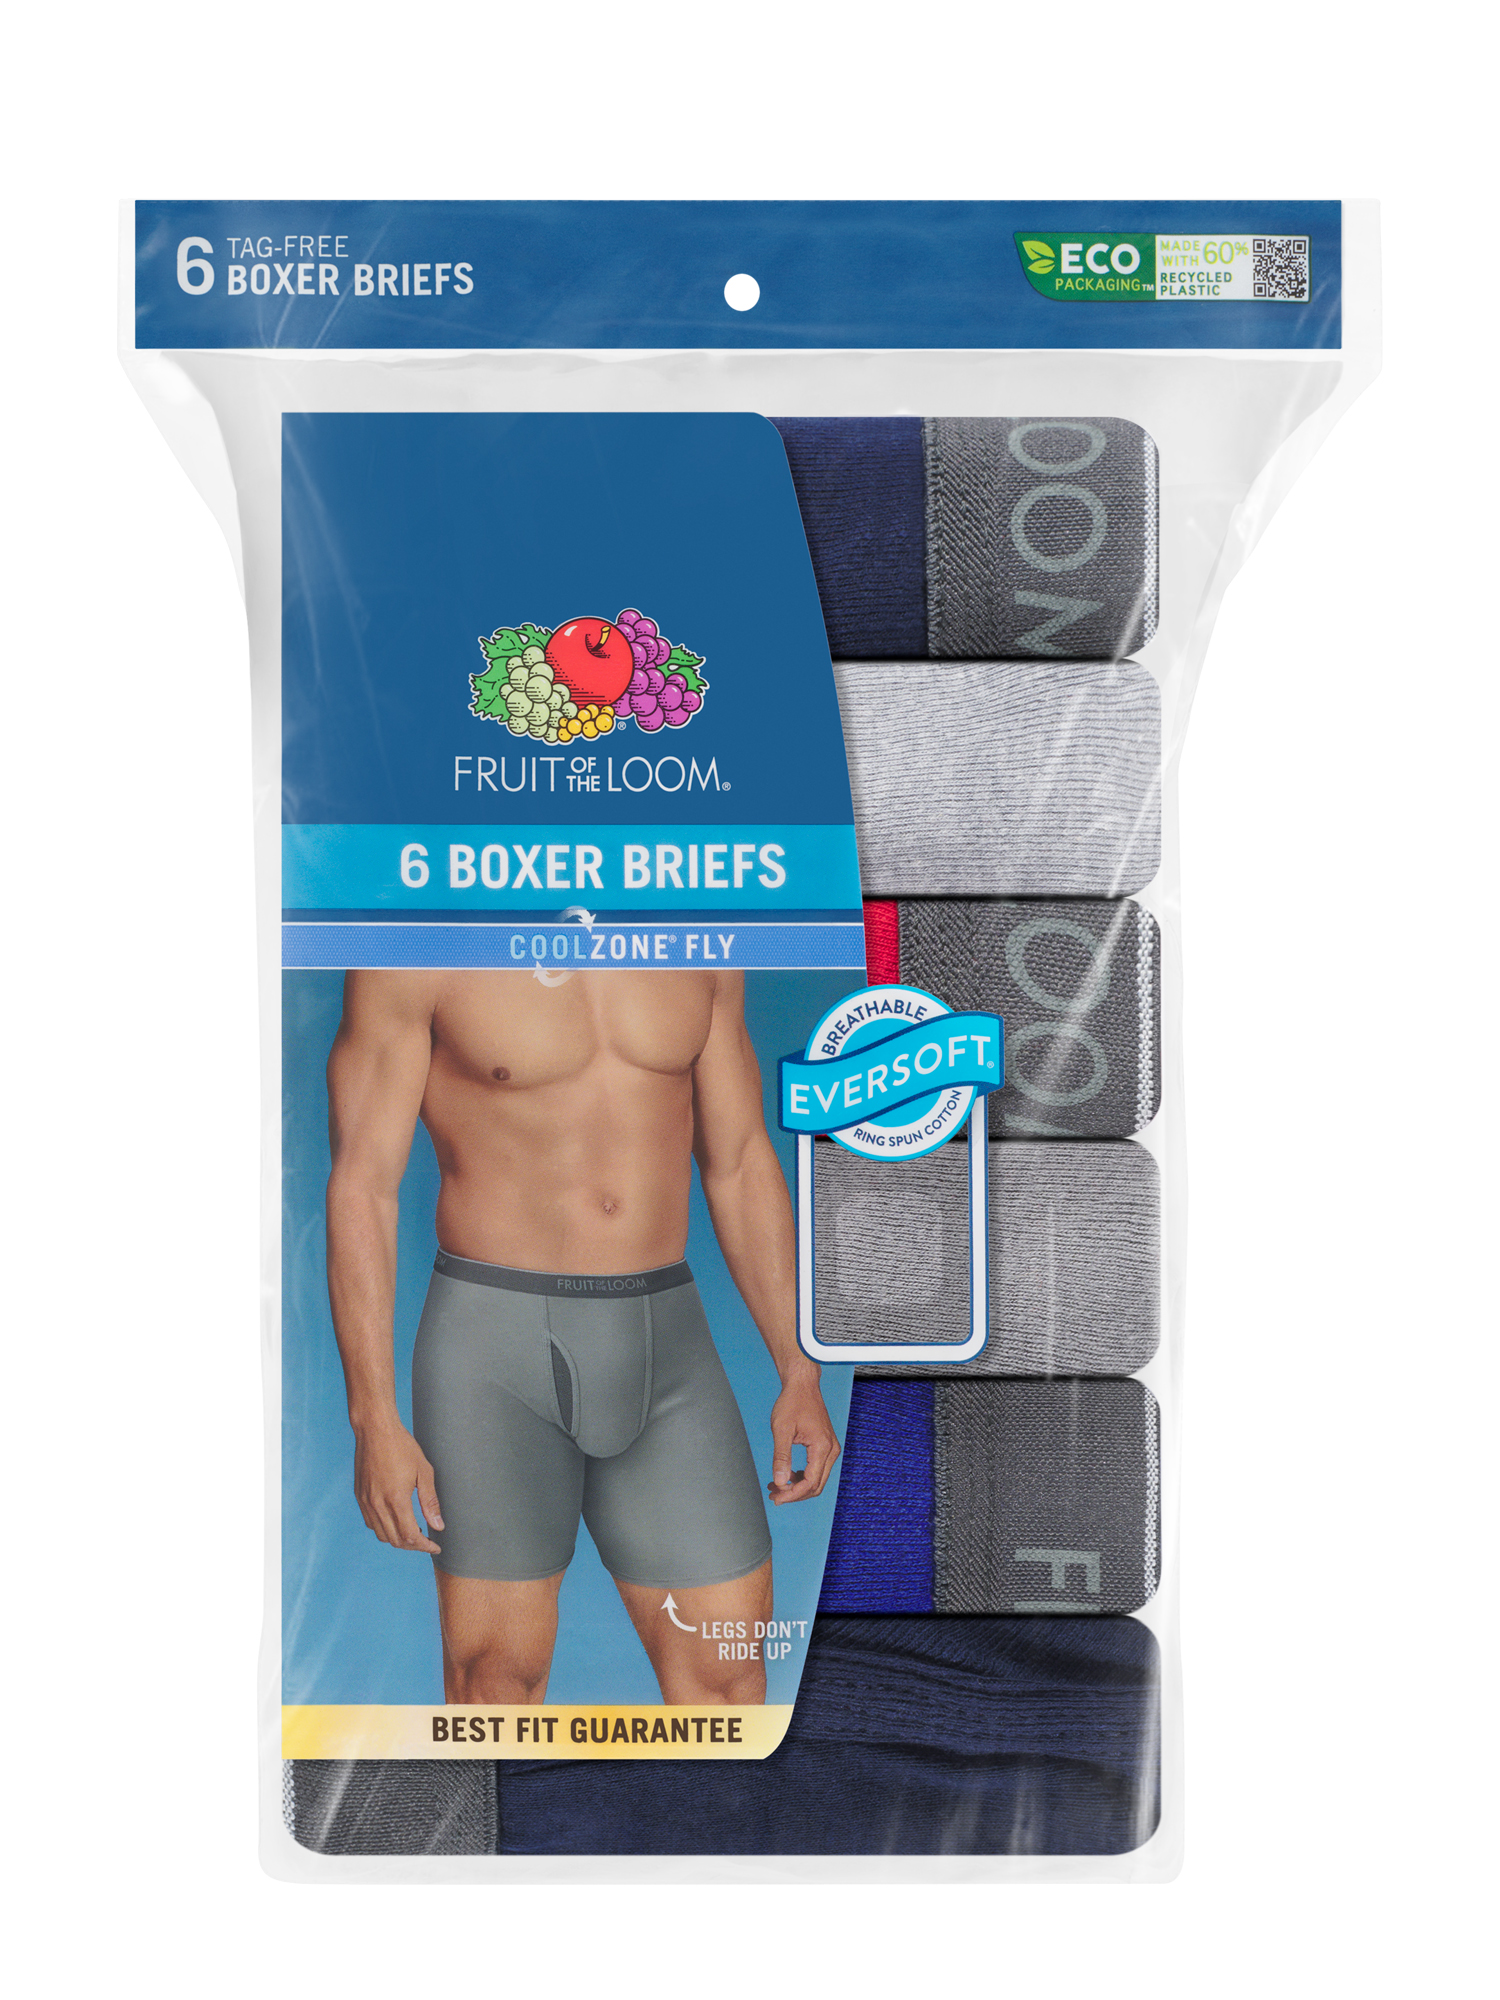 Fruit of the Loom Men's CoolZone Fly Boxer Briefs, 6 Pack - image 3 of 14